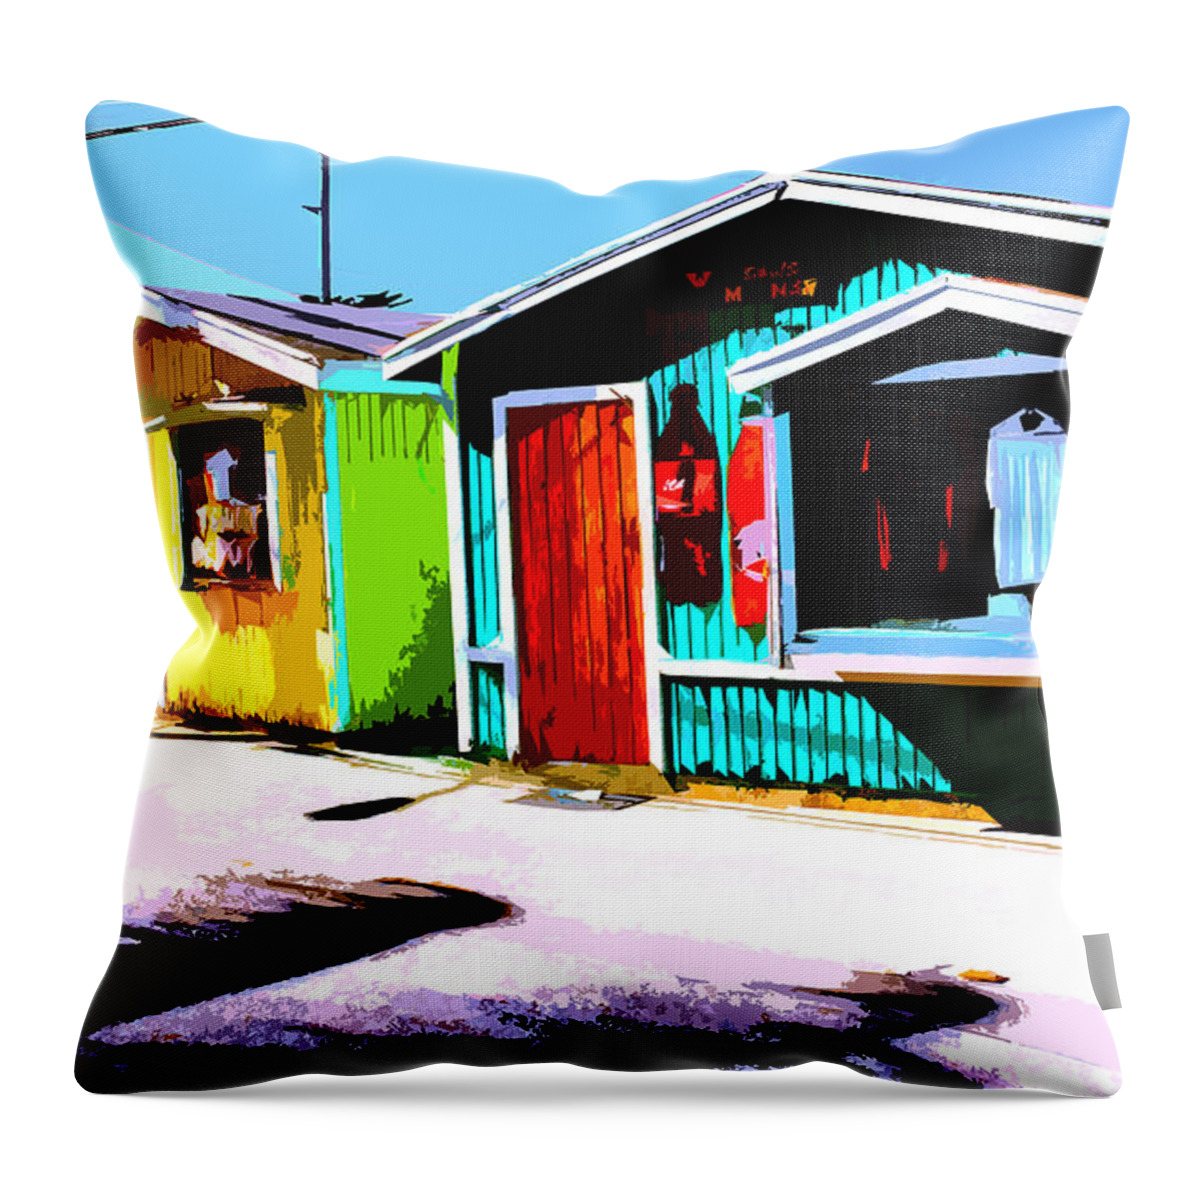 Island Life Throw Pillow featuring the painting Island Life 3 - Shopping by CHAZ Daugherty